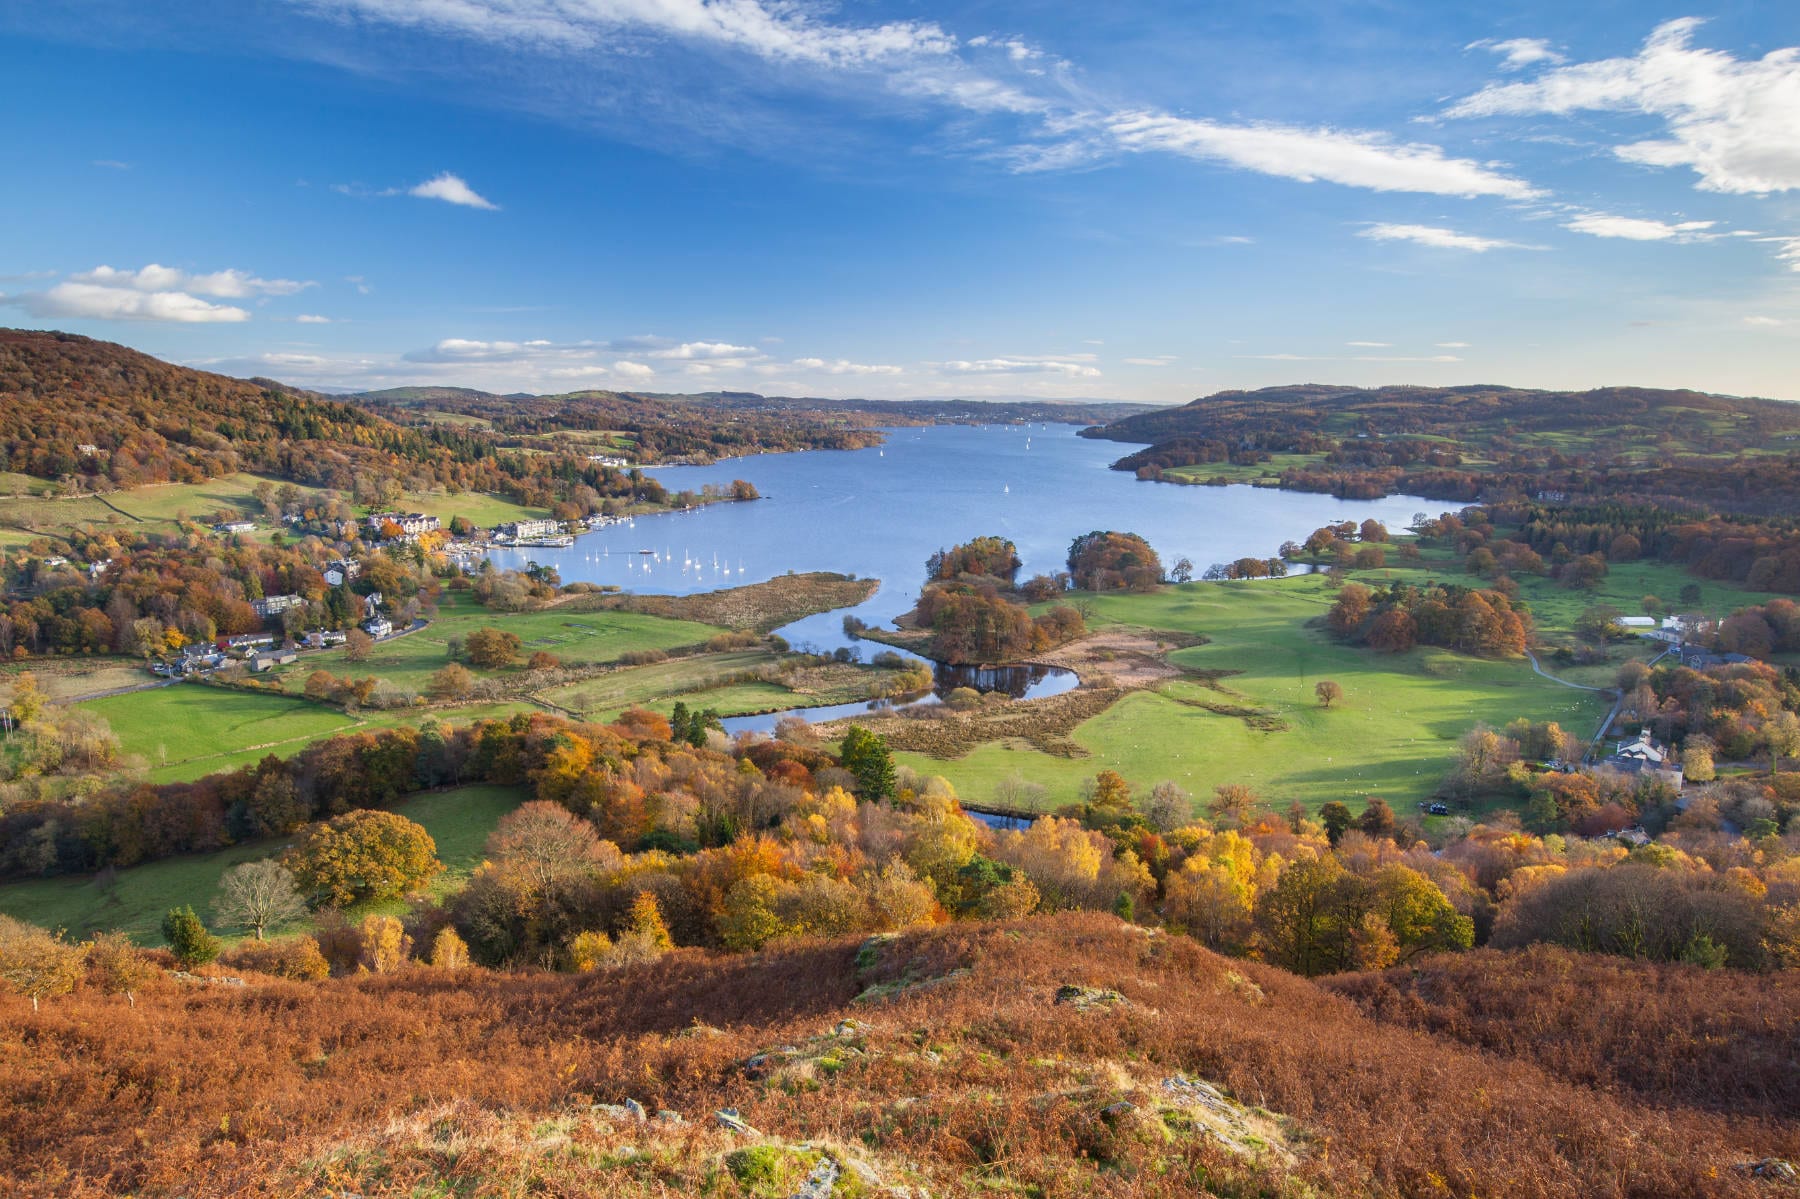 View of Windermere in the English Lake District